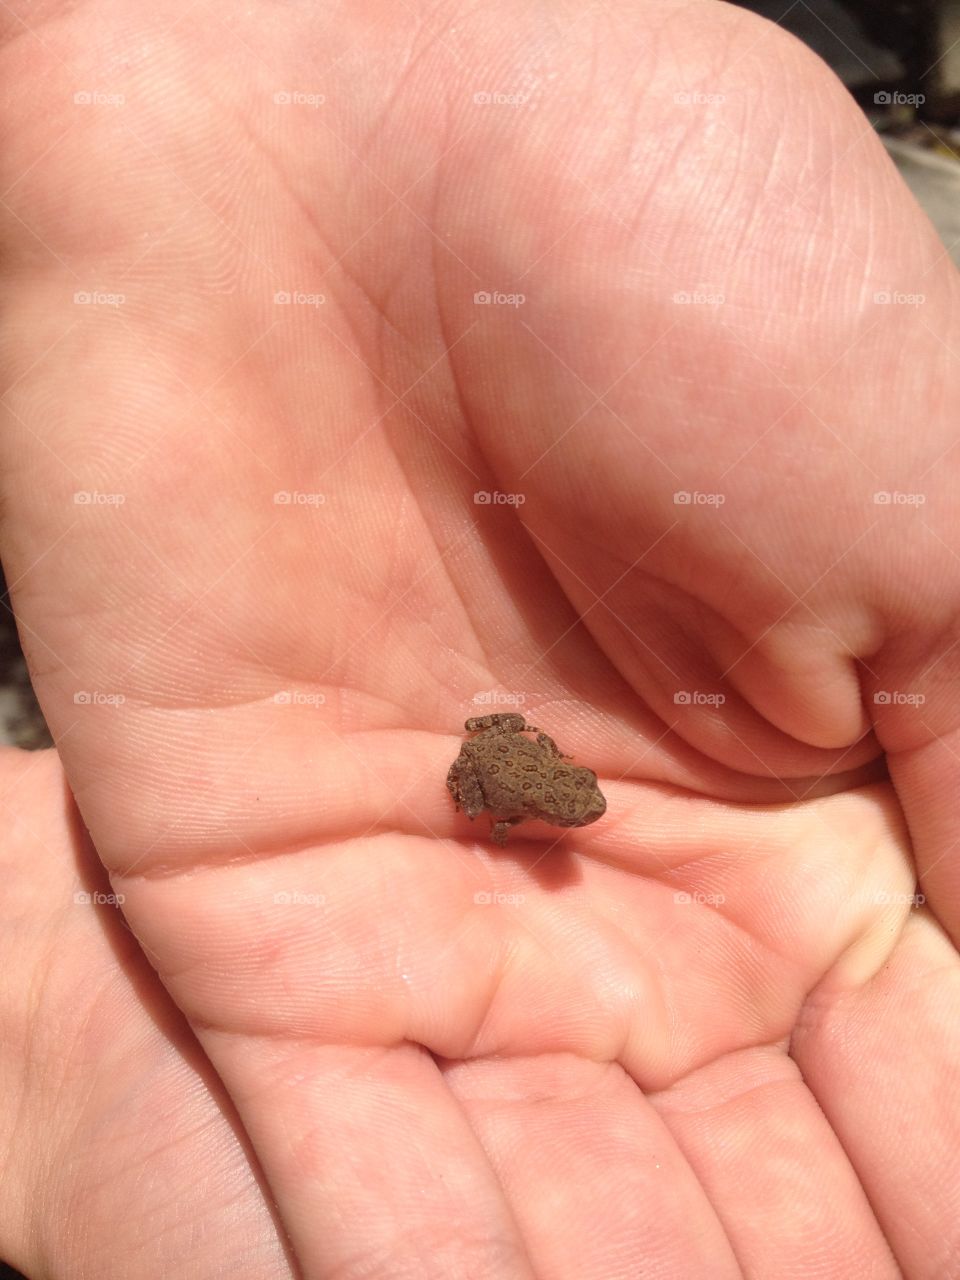 Baby Toad